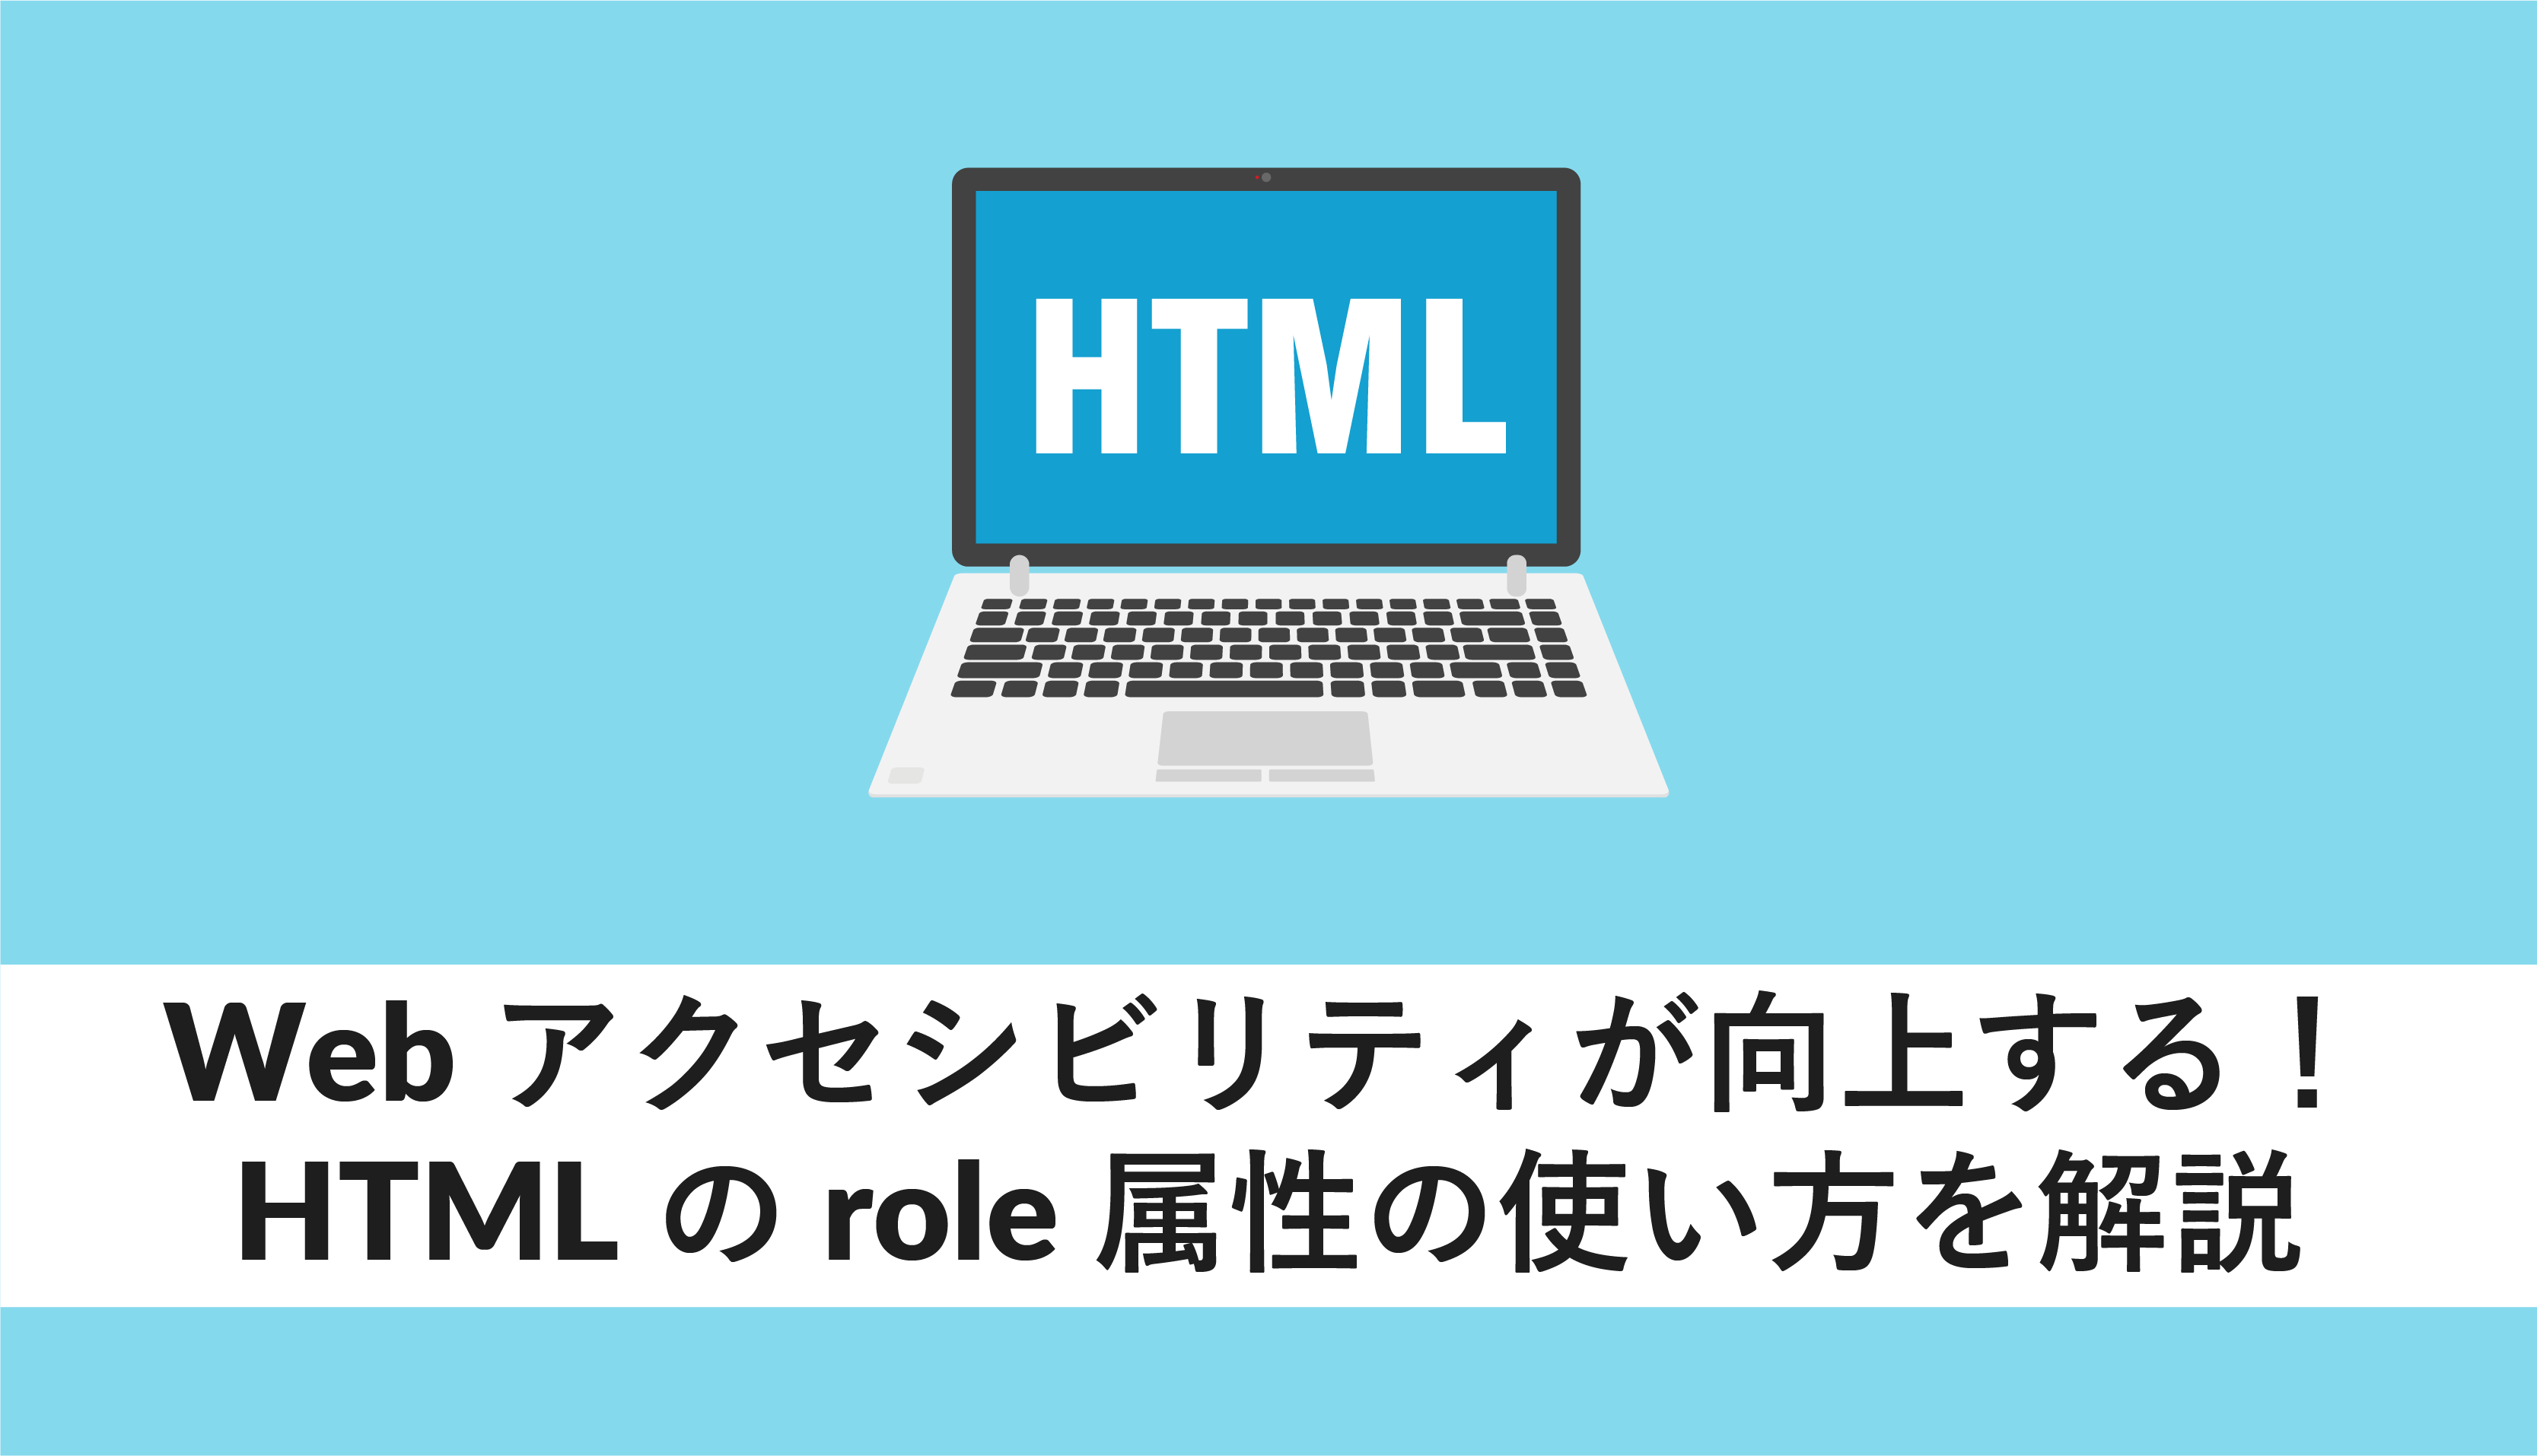 html role